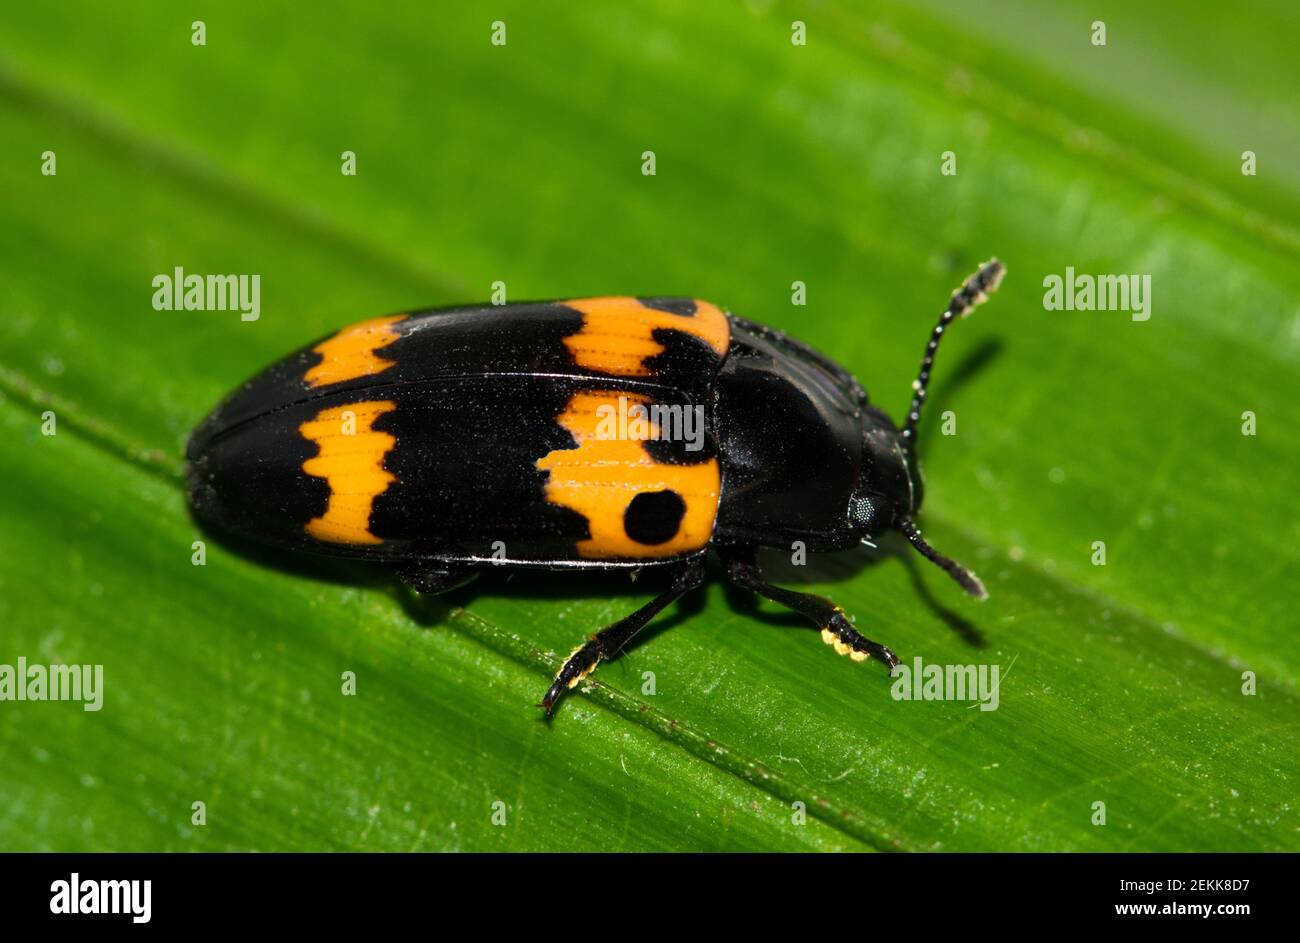 Pleasing Fungus Beetle (Megalodacne fasciata) isolated on a green leaf. Nocturnal insect found in the USA that feeds on wood destroying fungi. Stock Photo